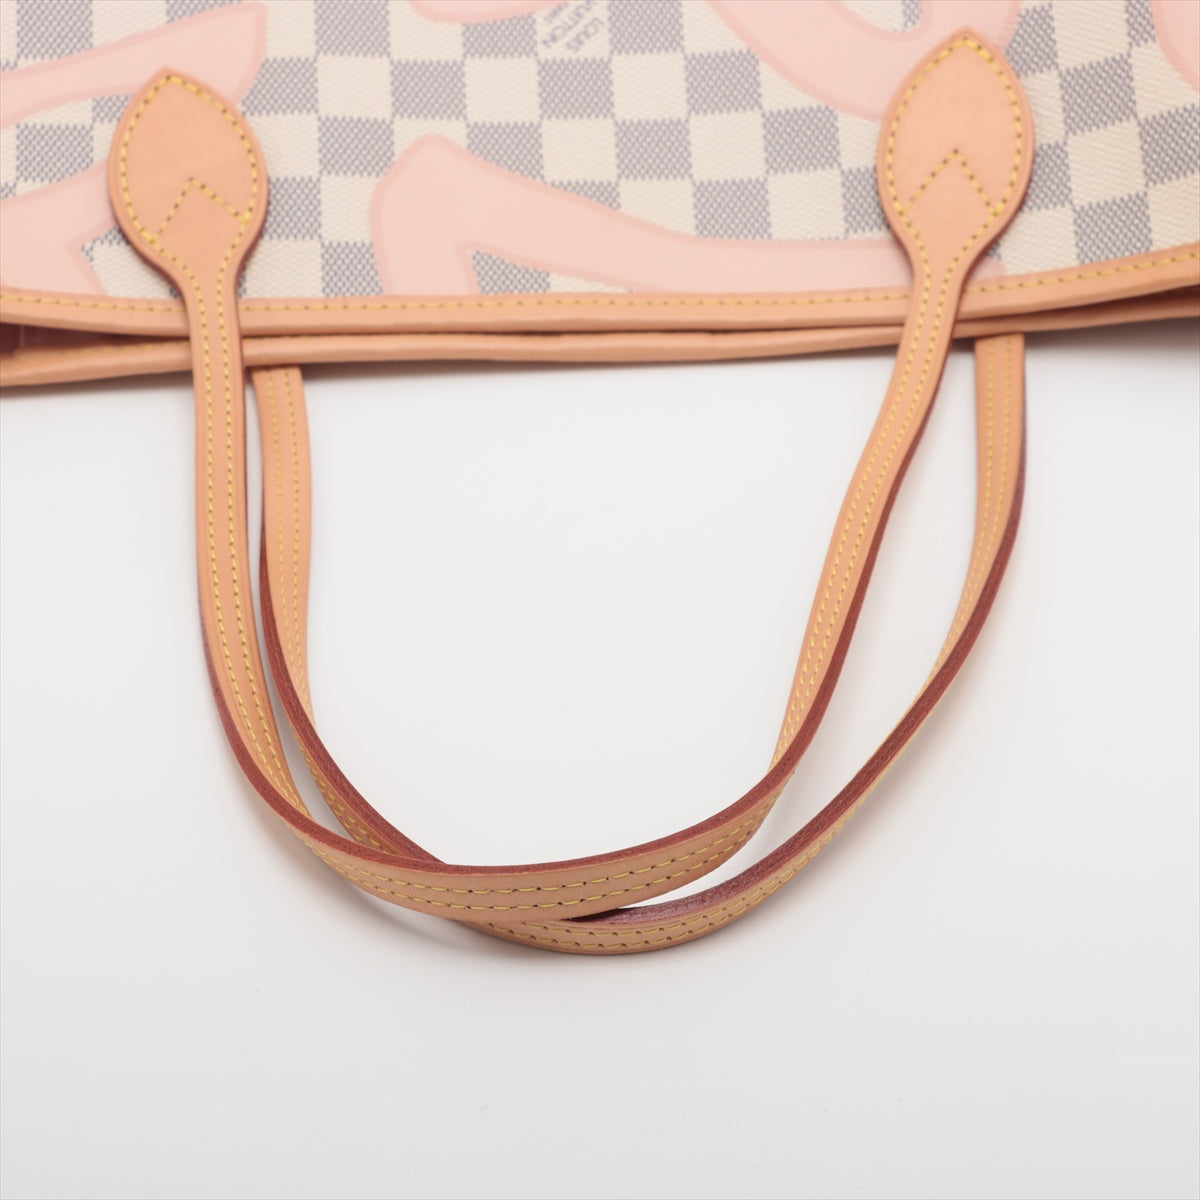 Louis Vuitton Damier Azul Neverfull MM N41050 There was an RFID response